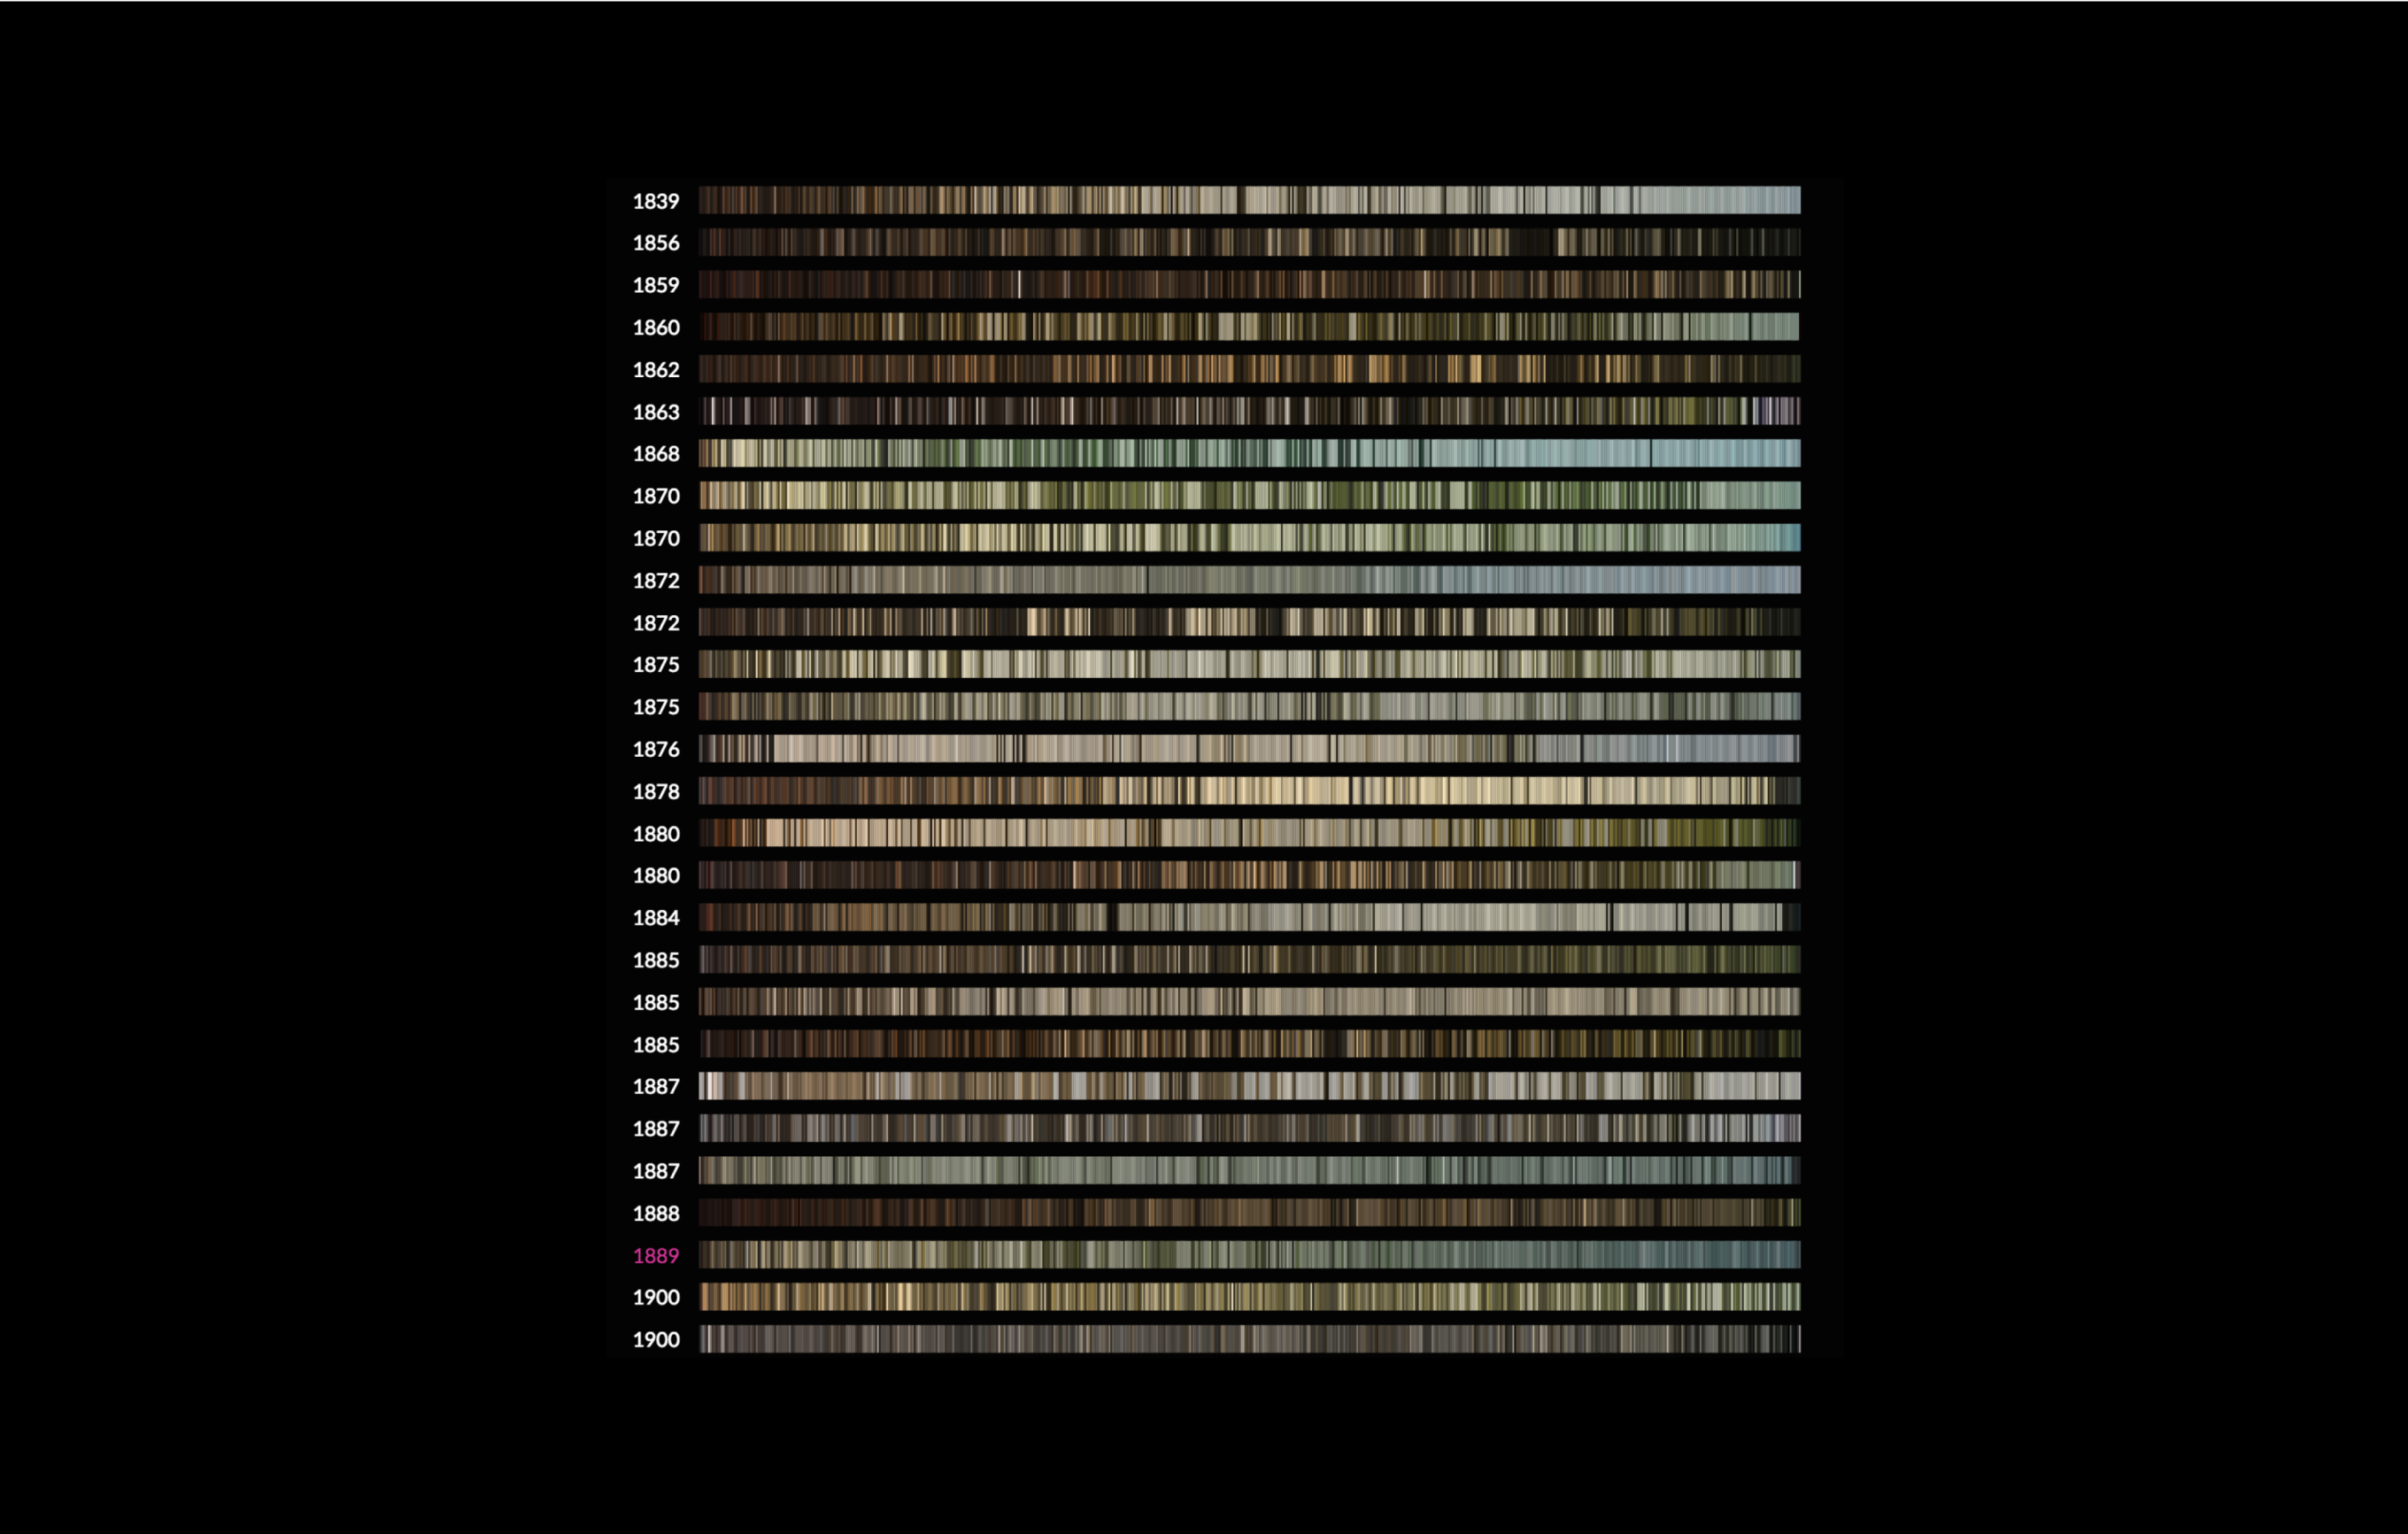 Each painting from the Rijksmuseum's Hague School collection is summarized as a strip of its colors. The strips are ordered by creation date. See Gabriël's In the Month of July highlighted in pink on hover.